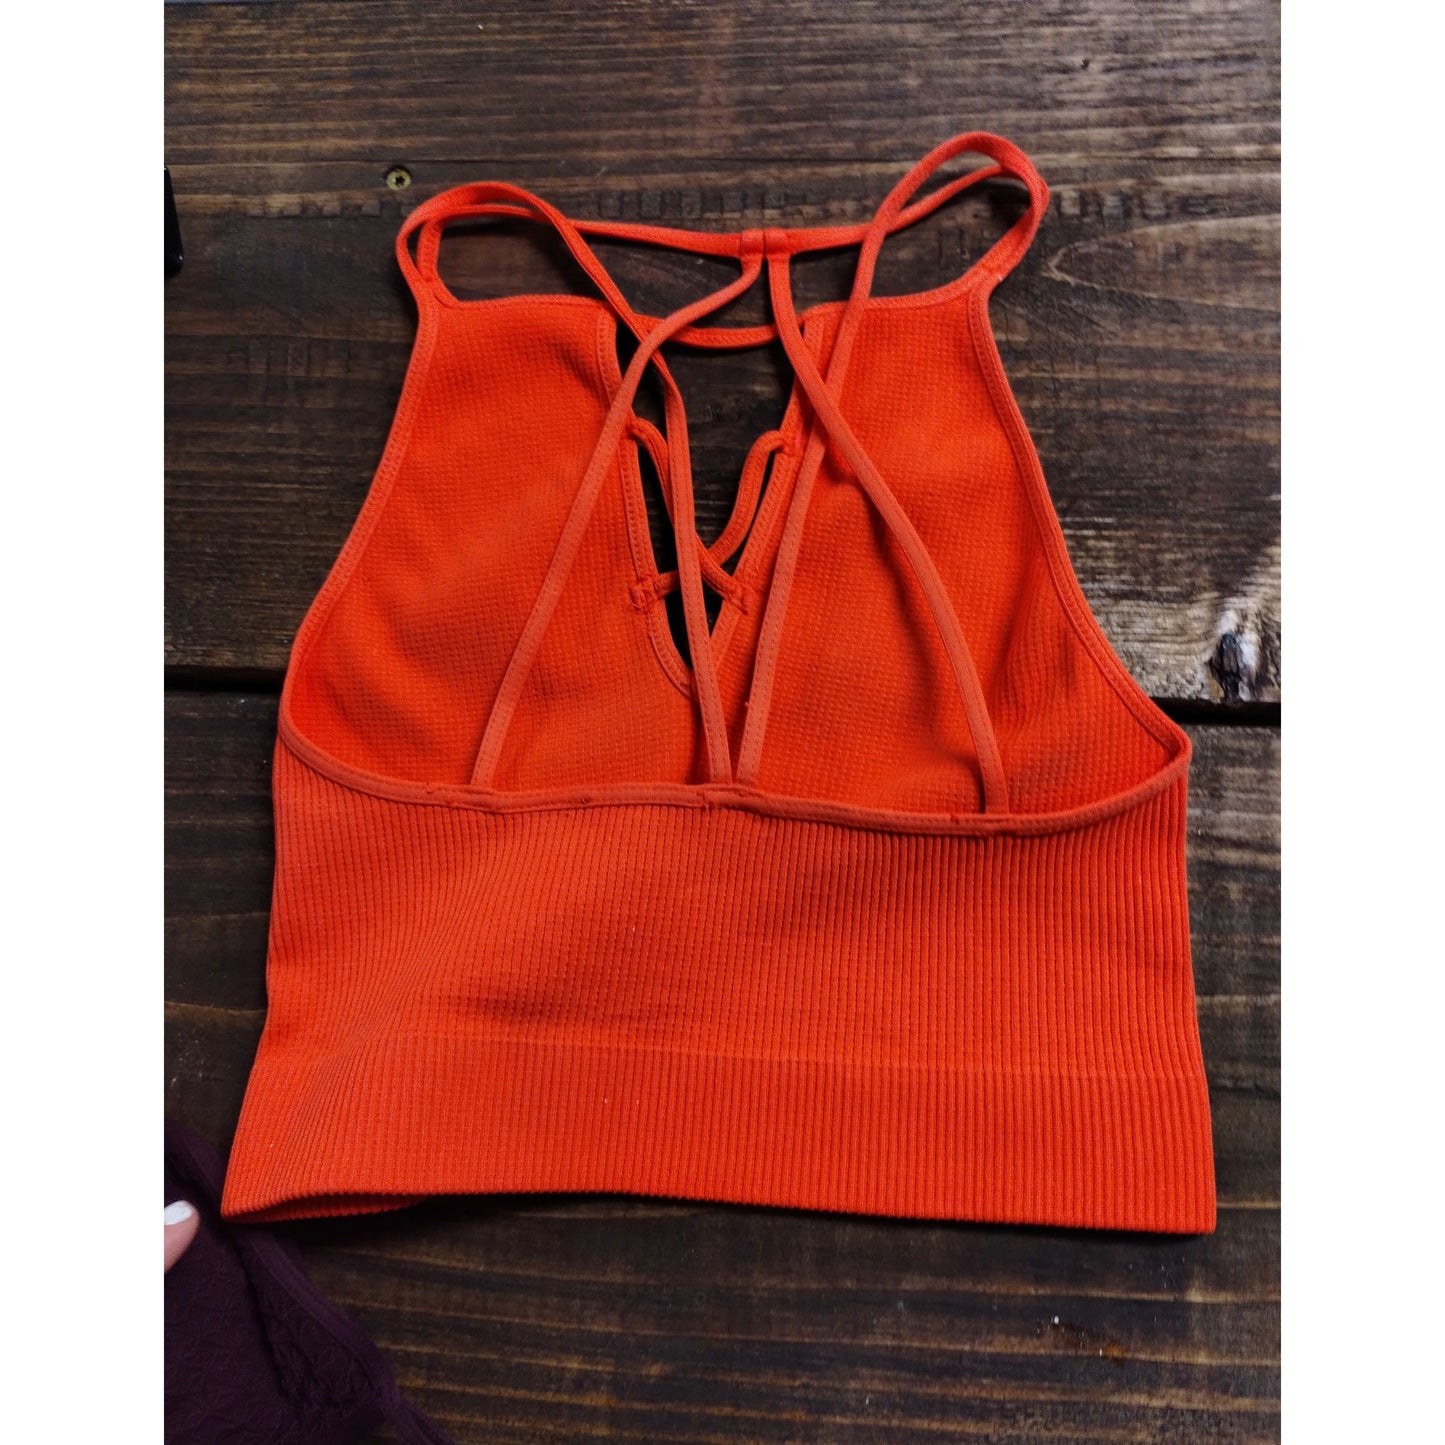 RIBBED CUTOUT HALTER BRALETTE TOP